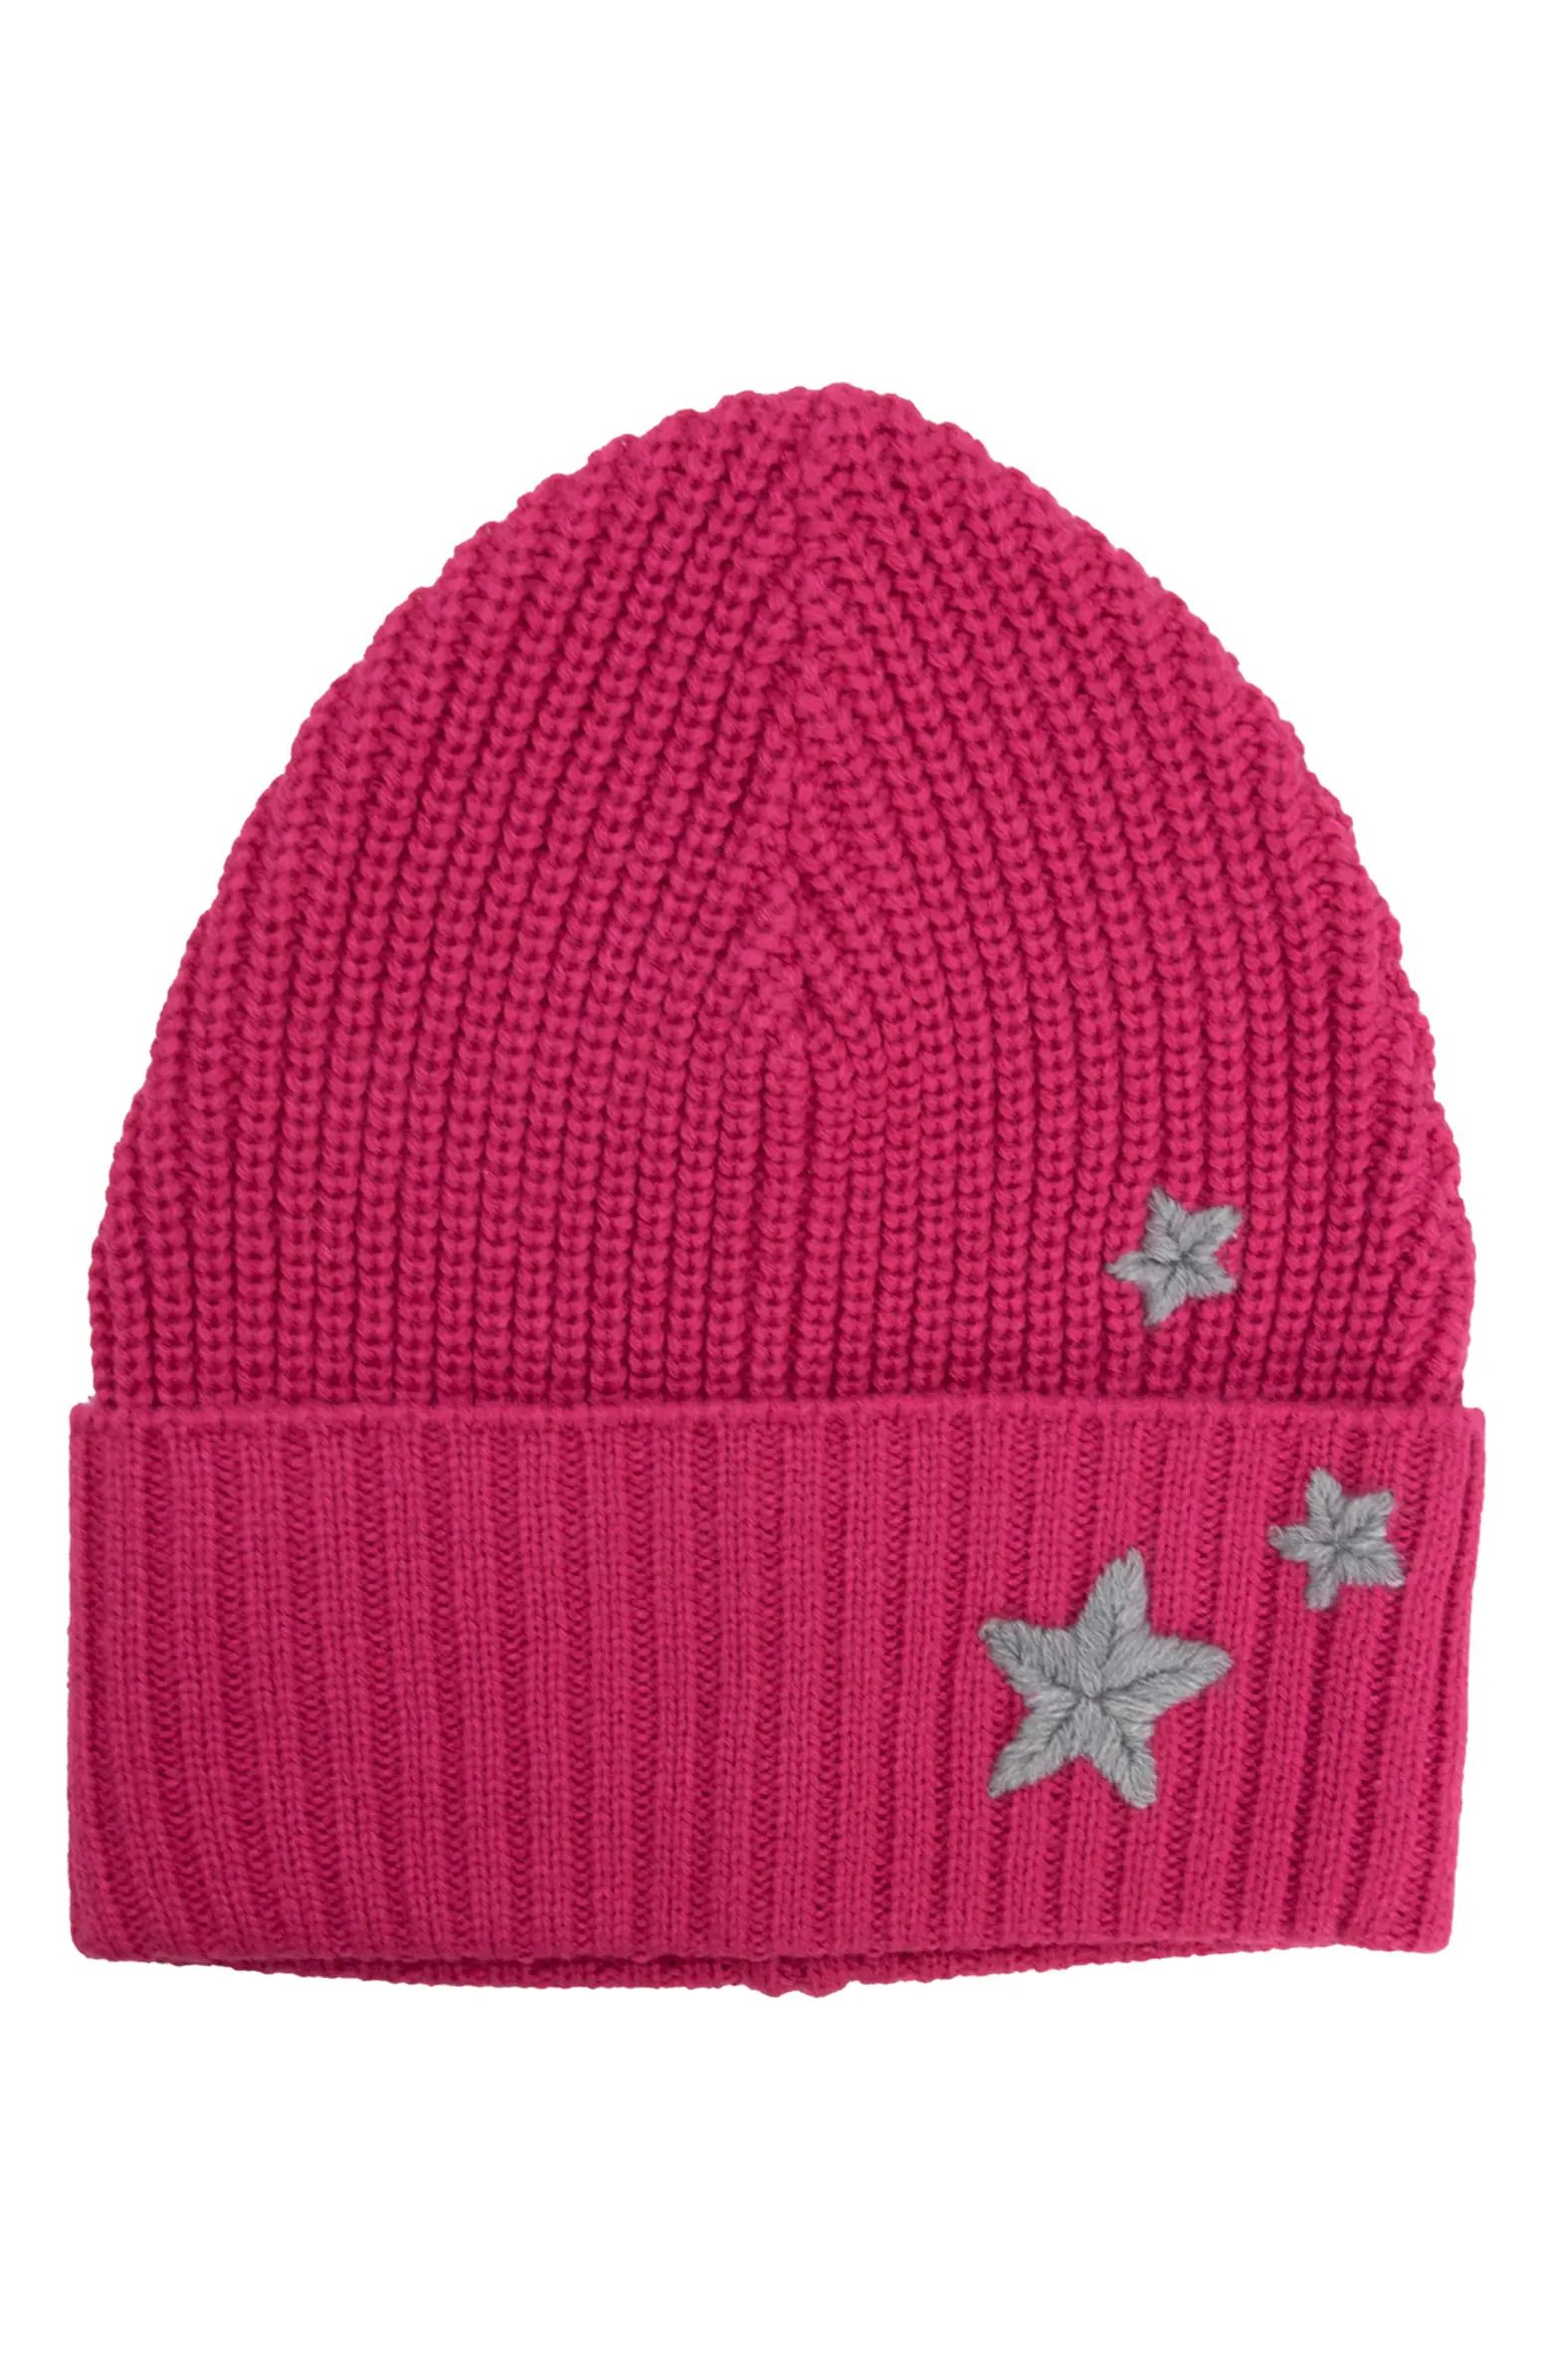 Embroidered Beanie | Nordstrom